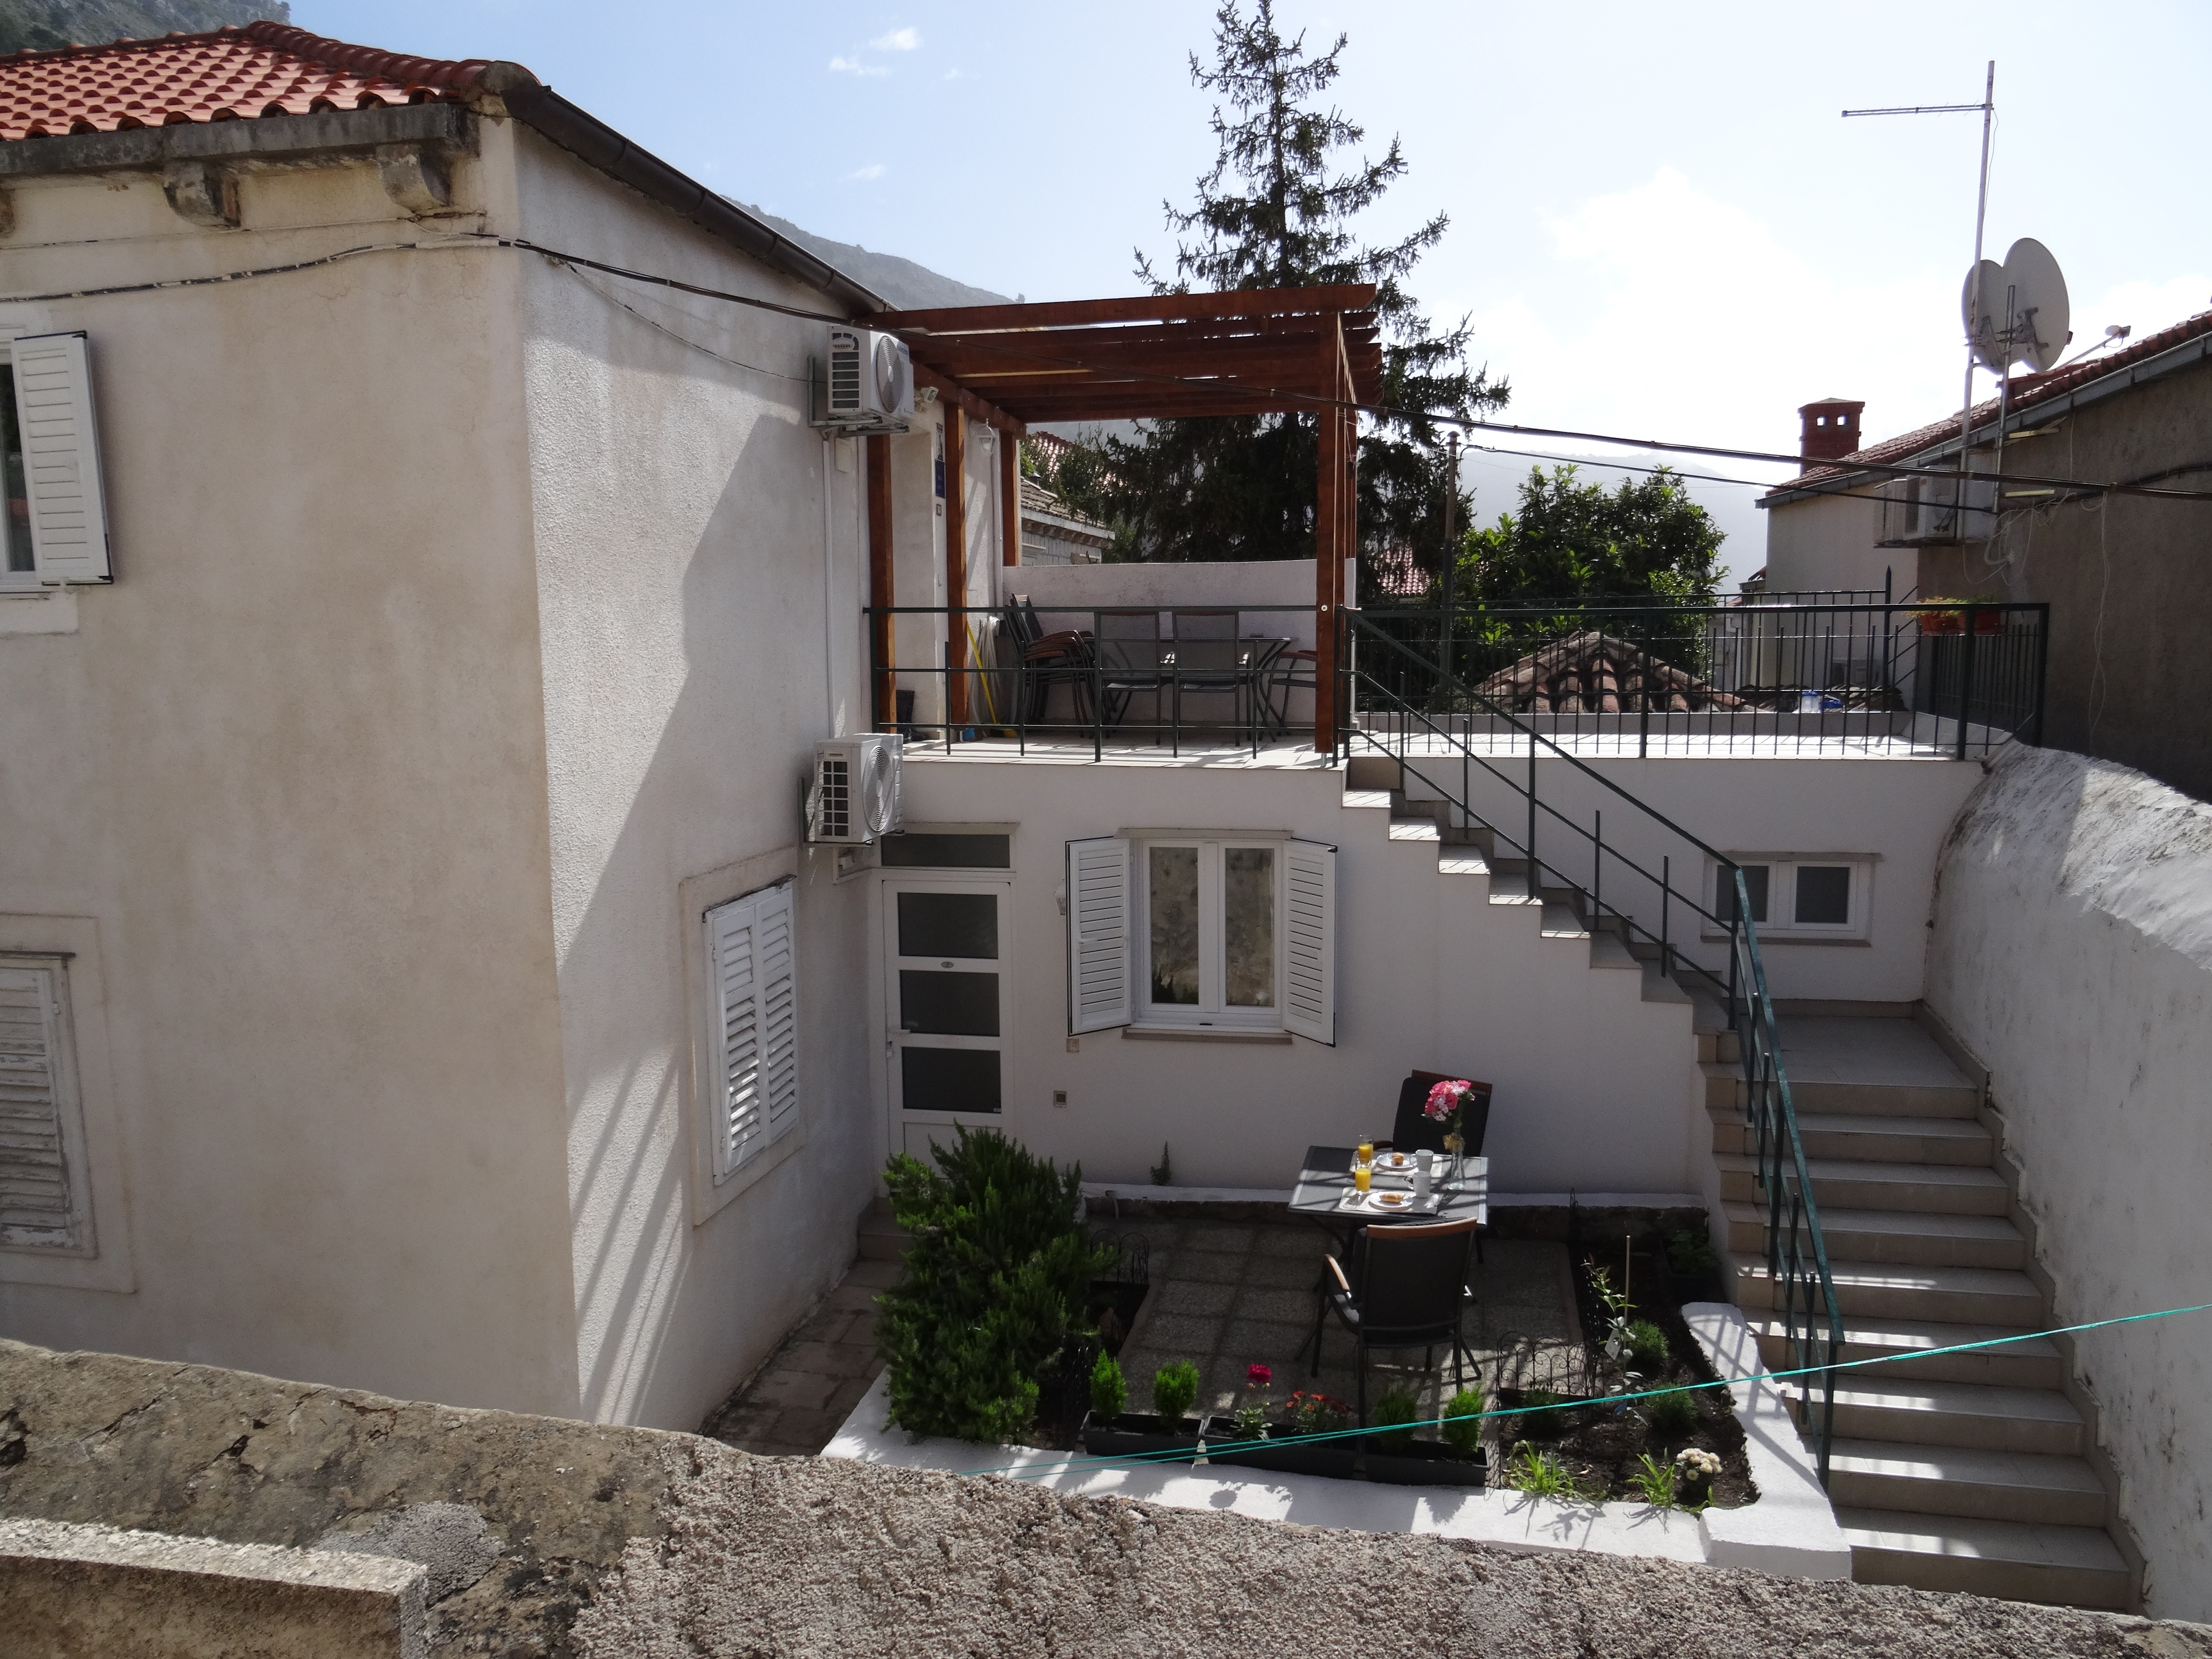 Only Apartments - Studio Apartment with Patio   Dubrovnik Riviera